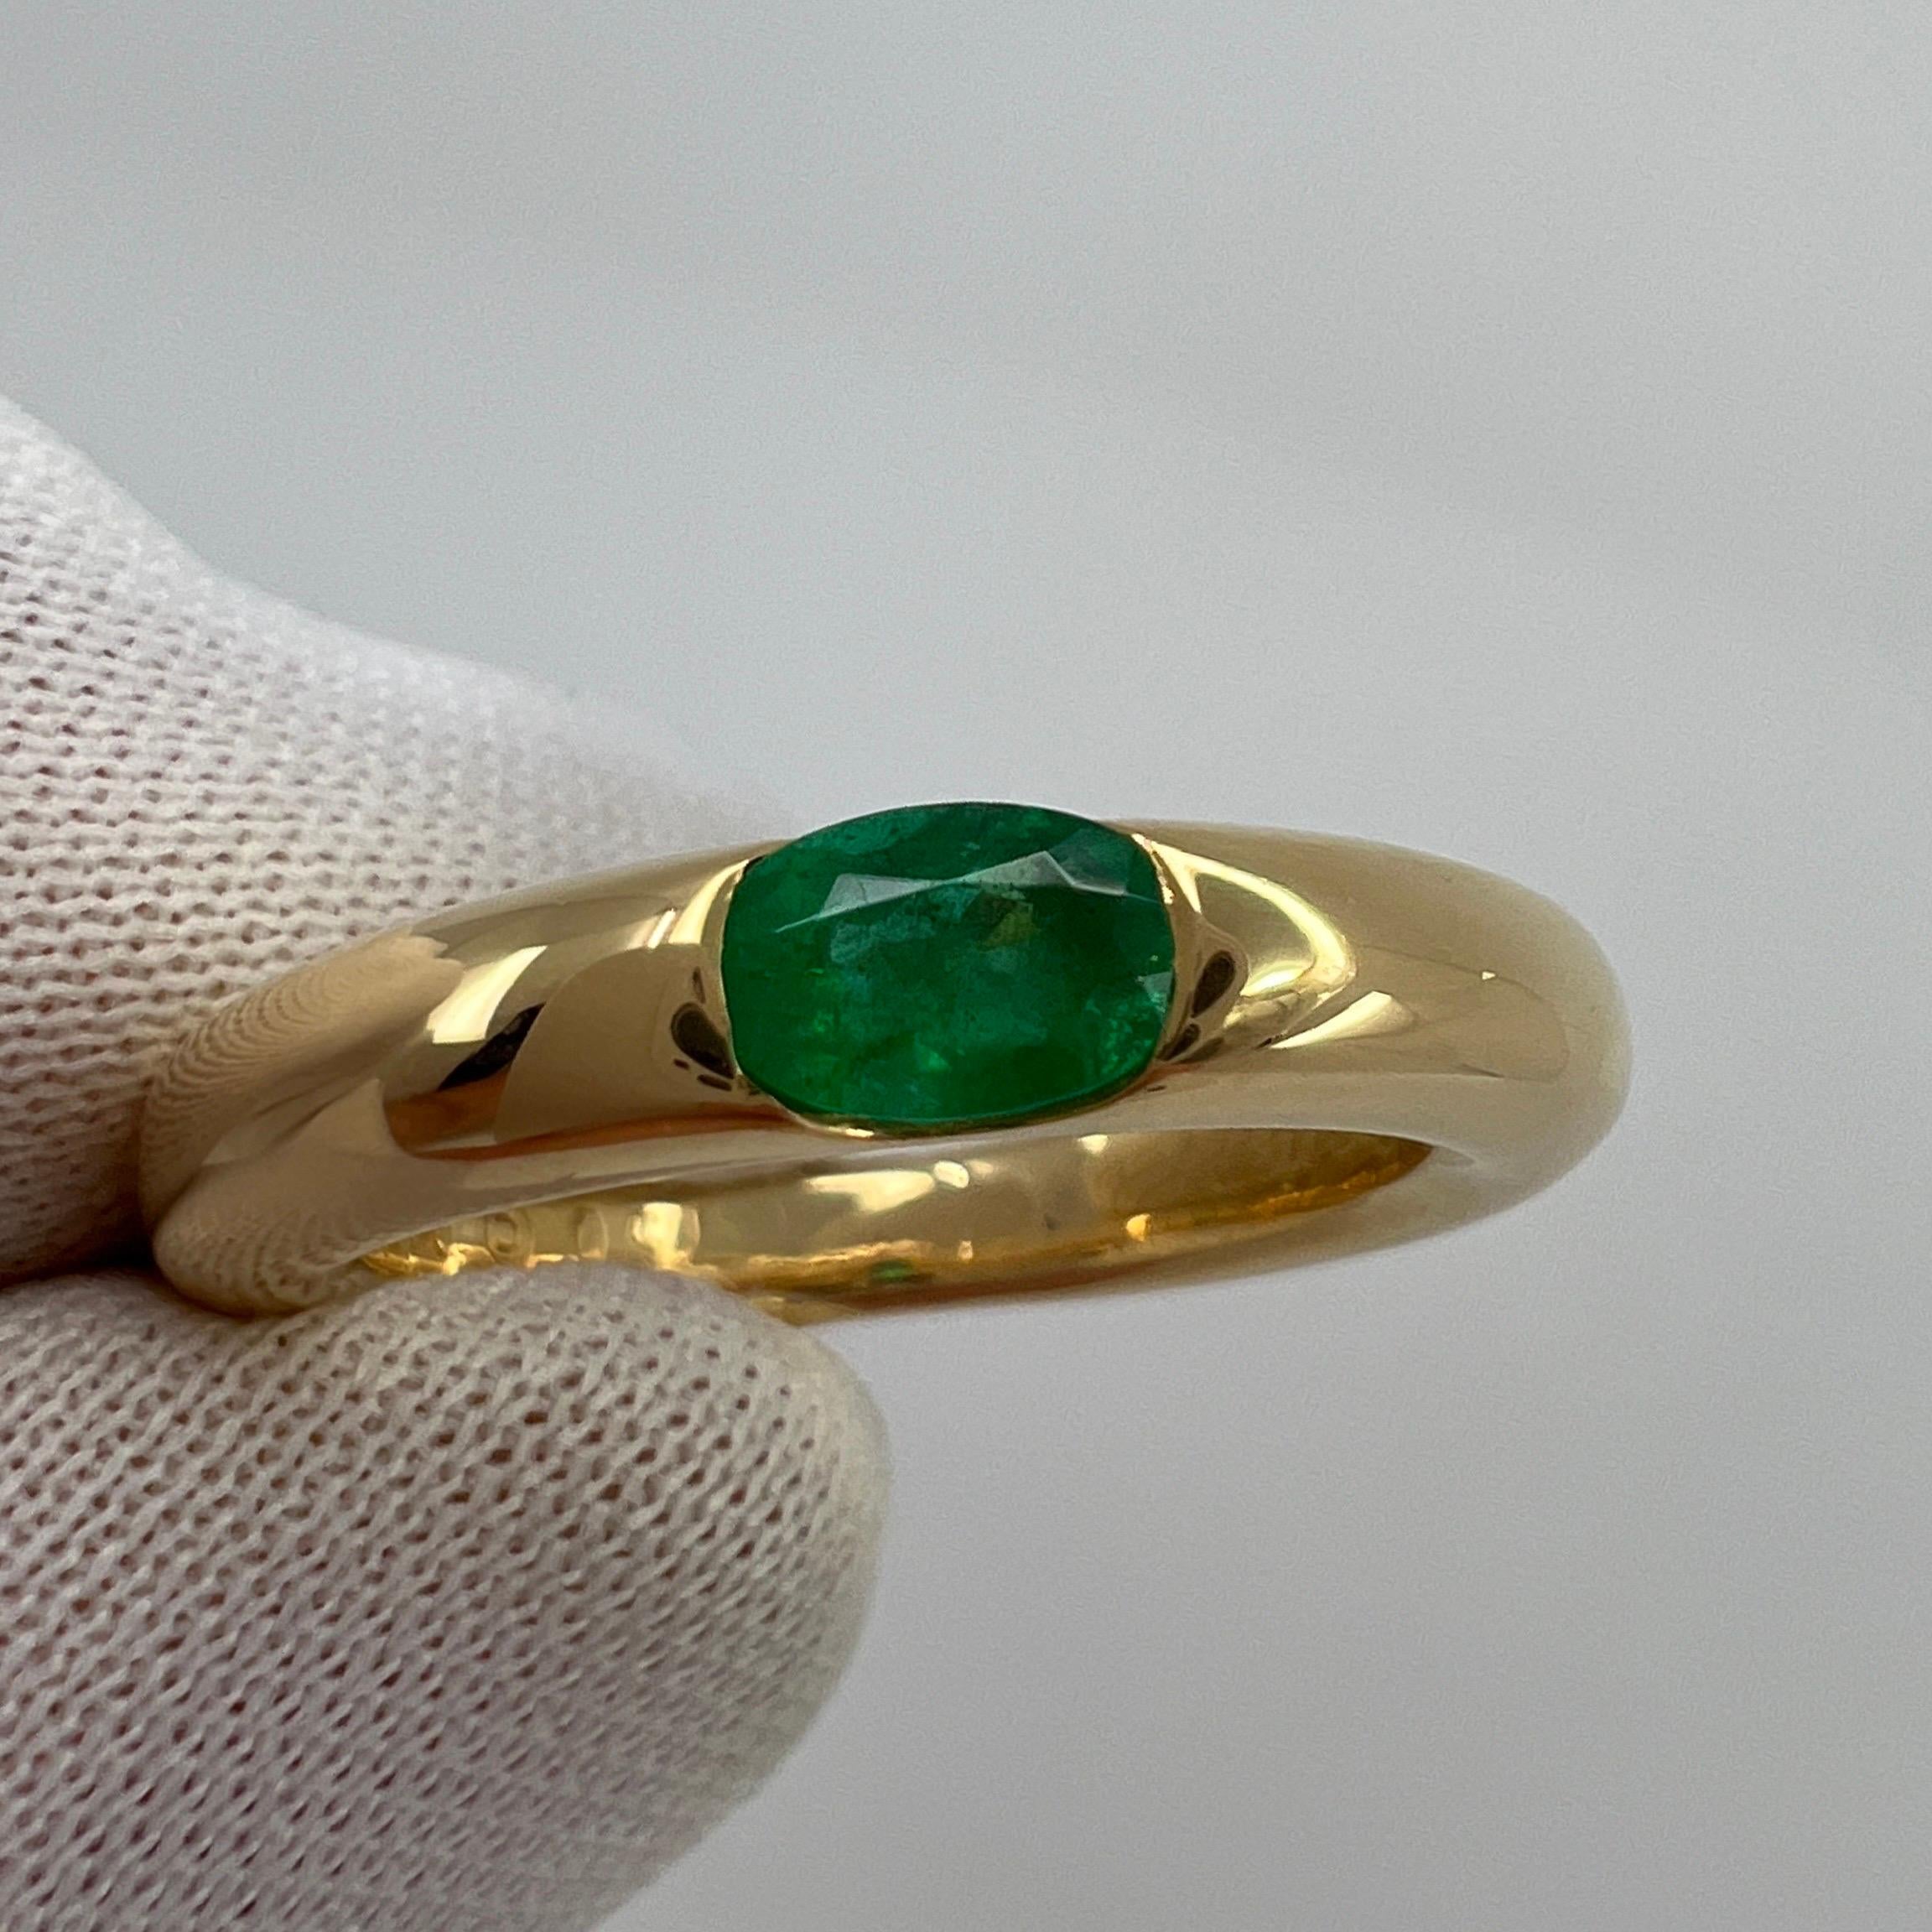 Vintage Cartier Vivid Green Emerald 18k Yellow Gold Solitaire Ring.

Stunning yellow gold ring set with a fine vivid green emerald. Fine jewellery houses like Cartier only use the finest of gemstones and this emerald is no exception. 
An excellent